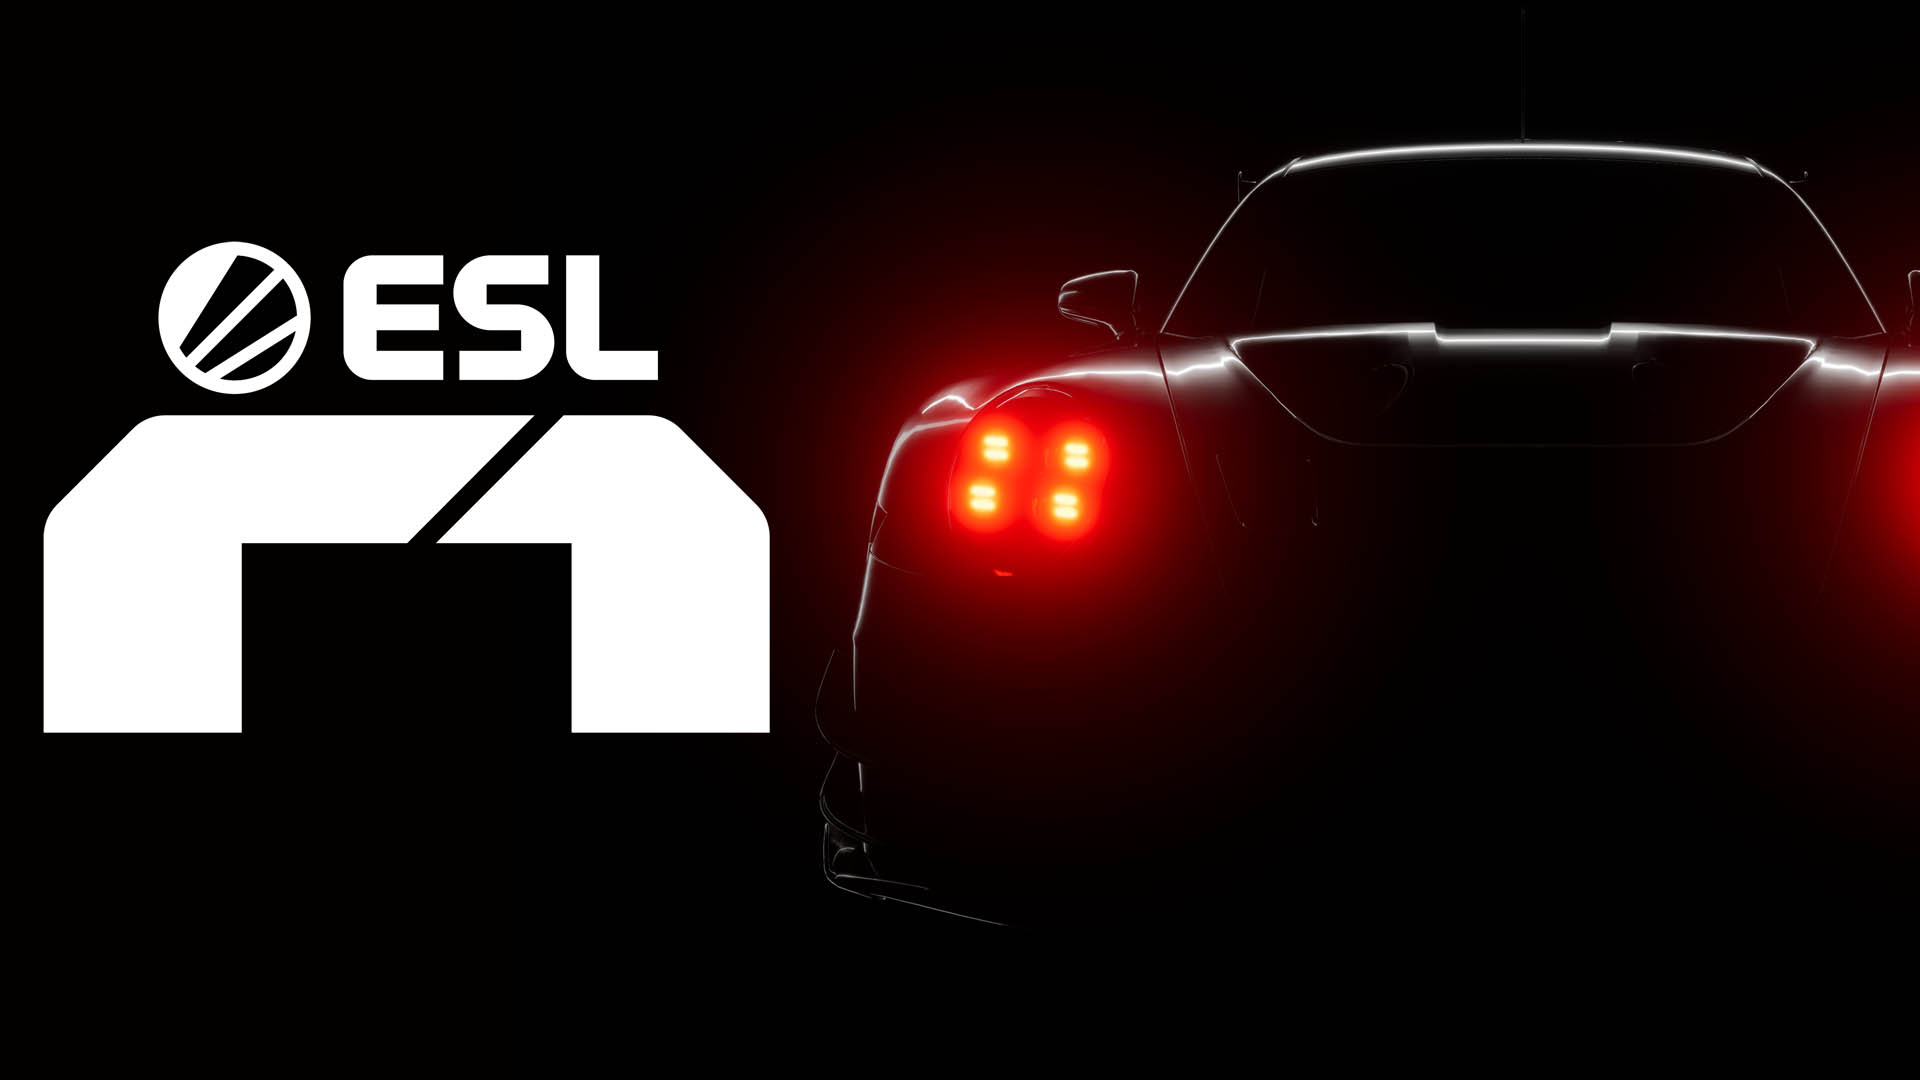 Everything you need to know about ESL R1, the €1million sim racing competition